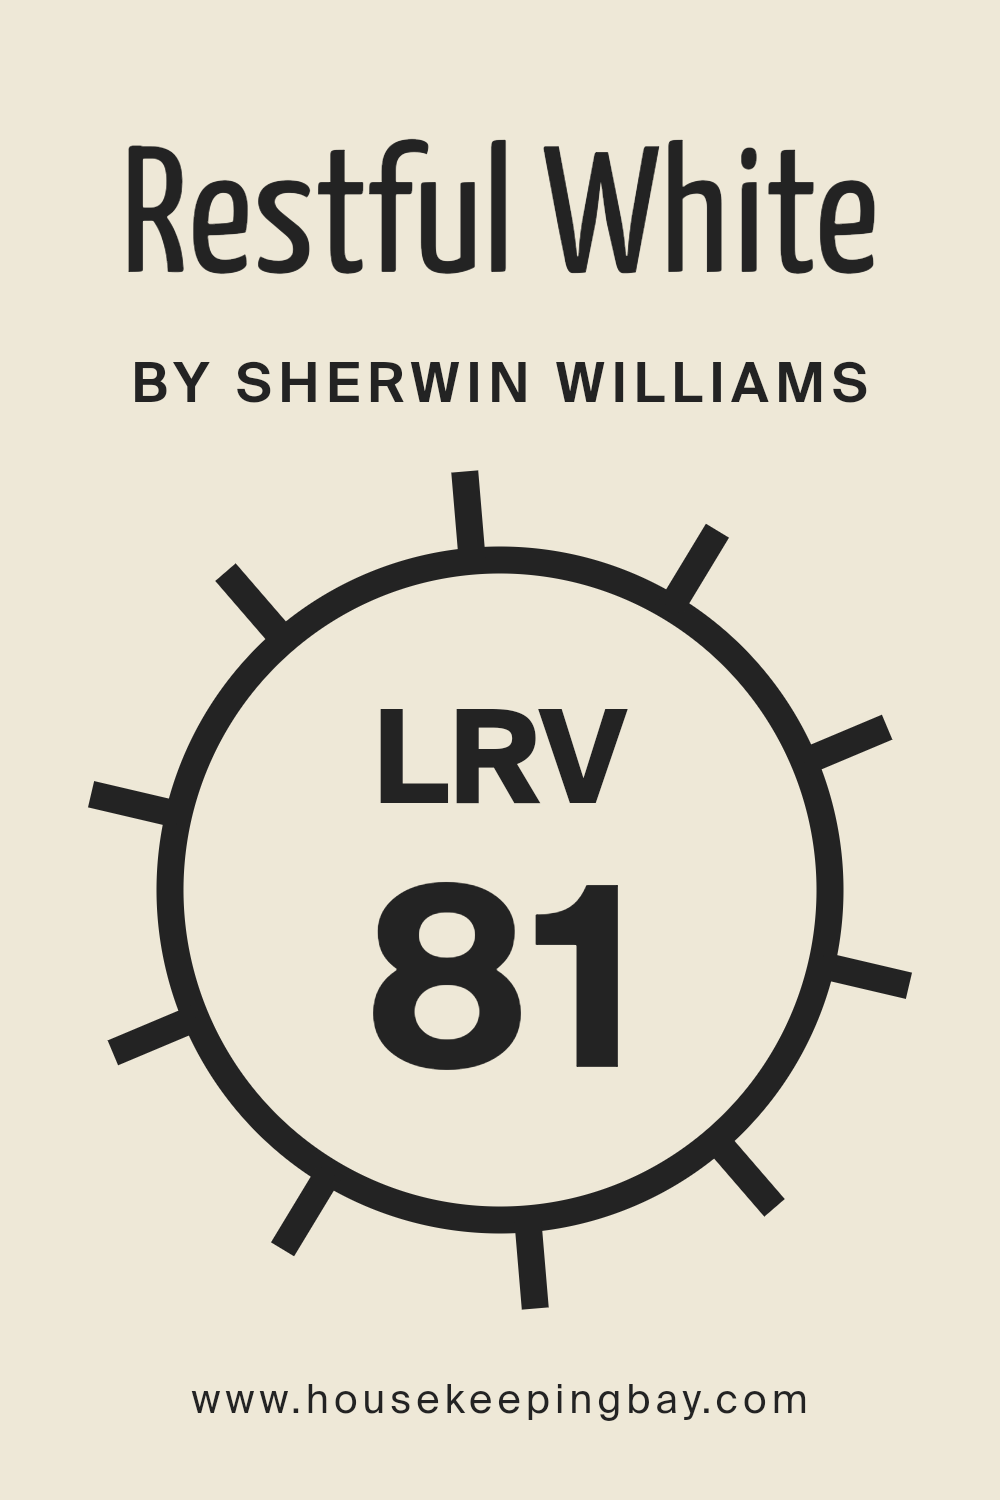 what_is_the_lrv_of_restful_white_sw_7563